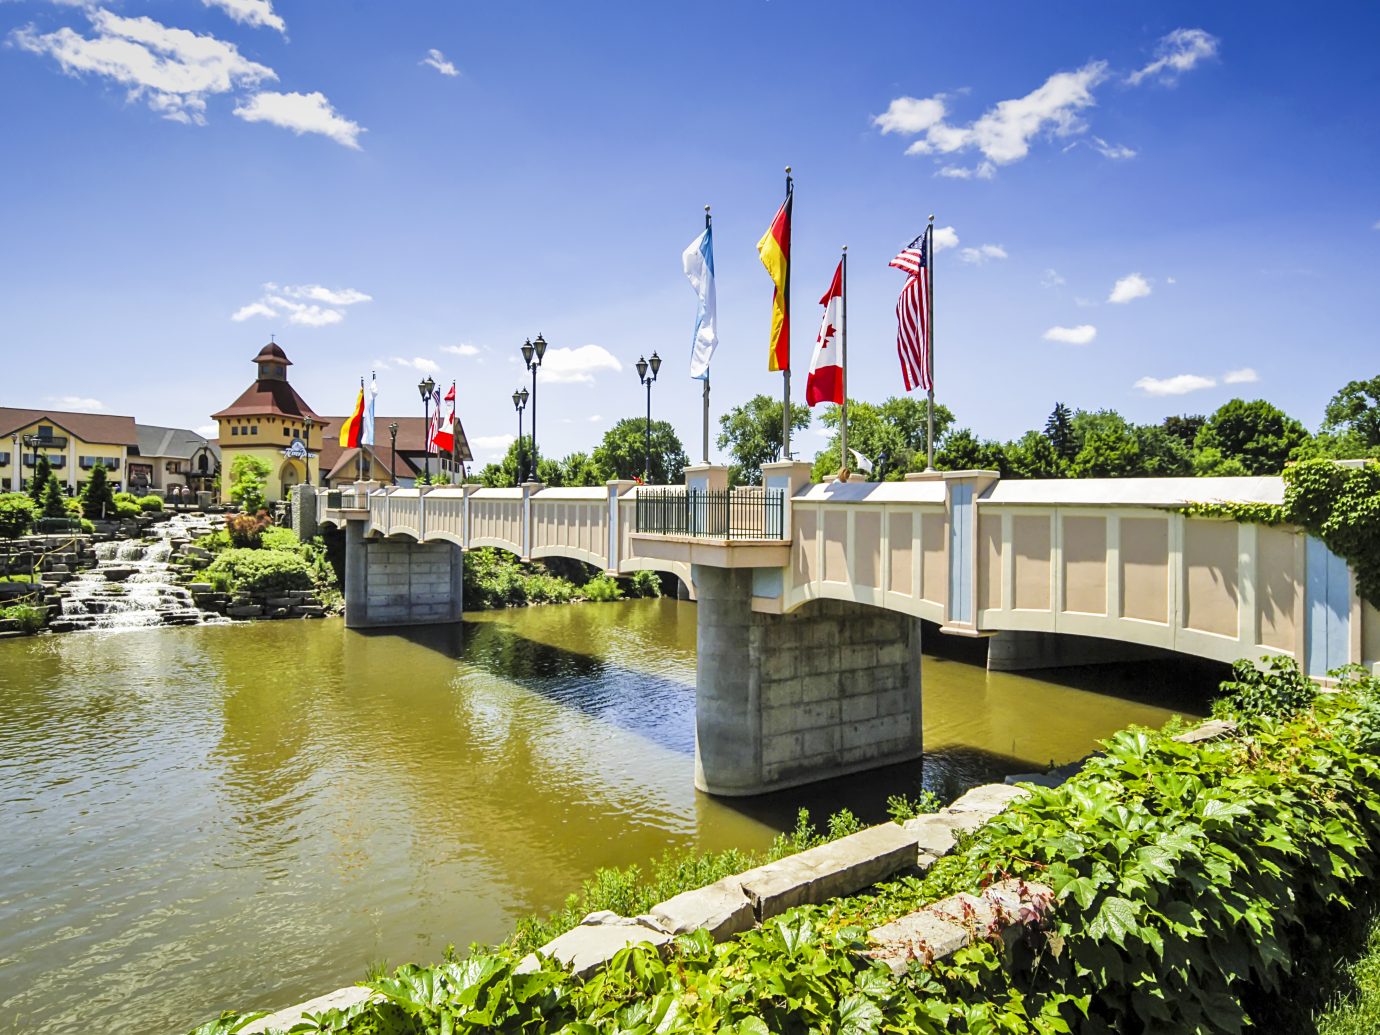 The International Bridge over the river Cass in Frankenmuth MI